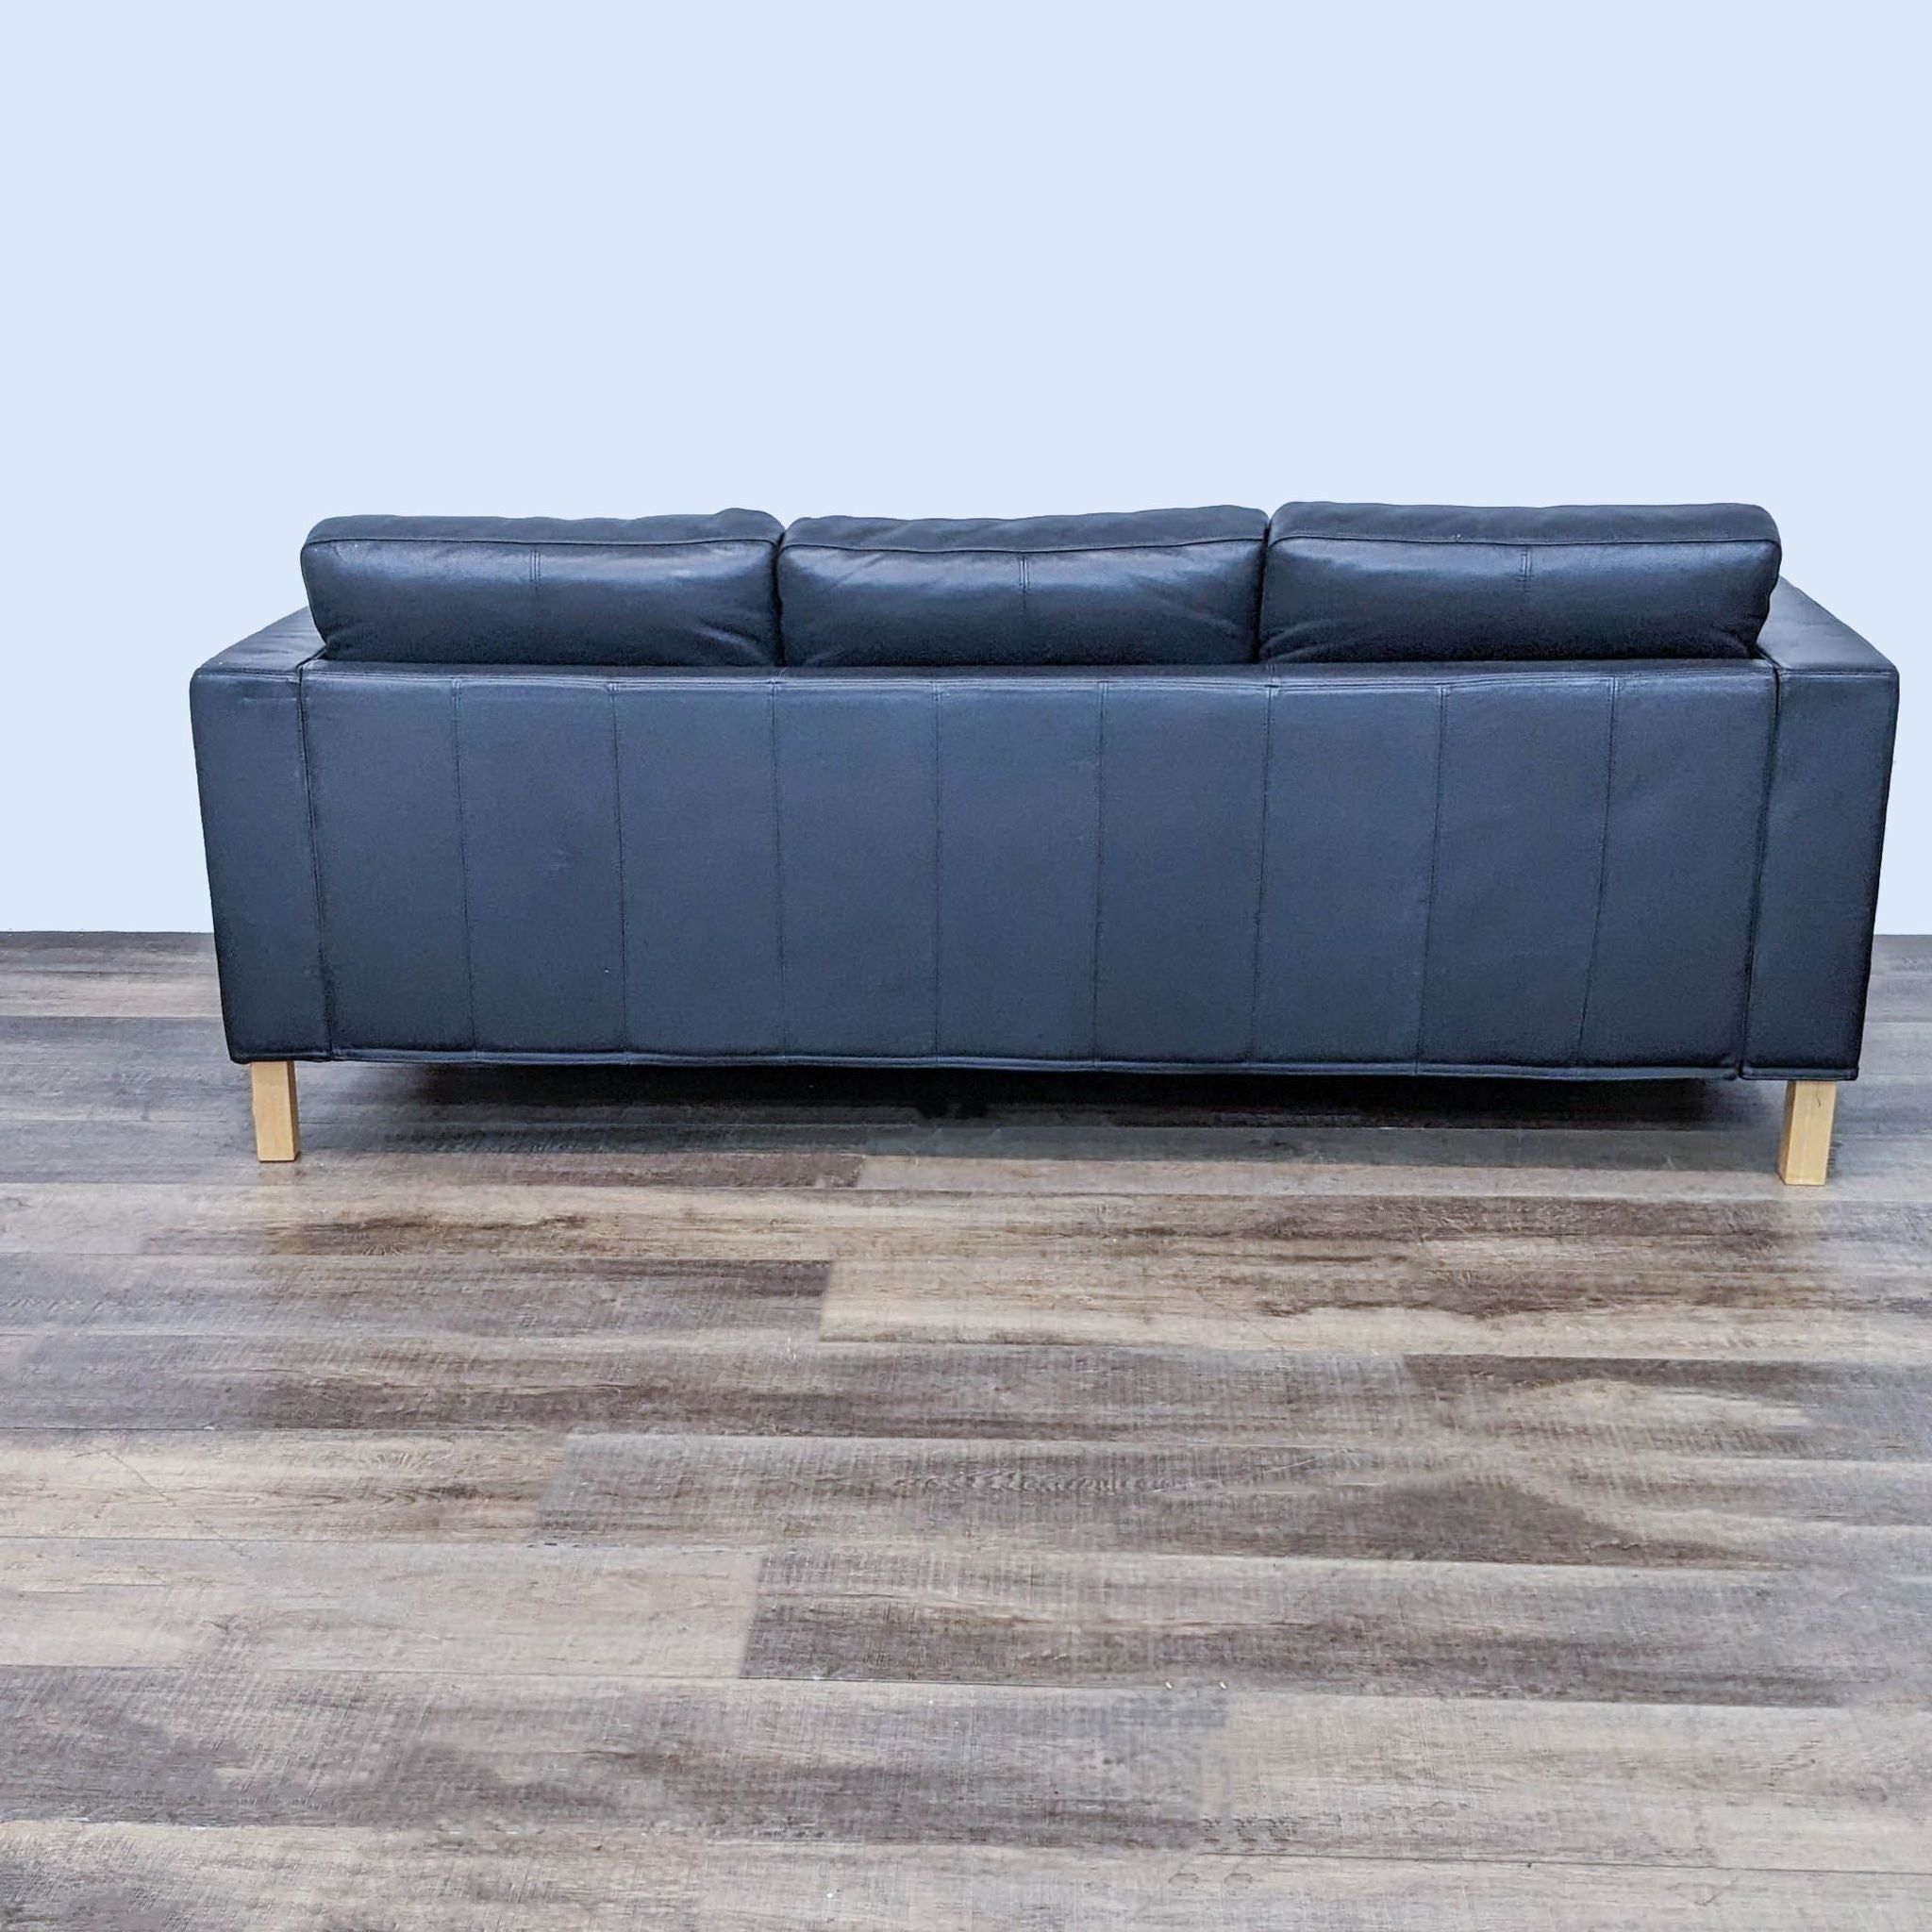 Rear view of a 3-seat black sofa by Reperch with visible seams and wooden legs.